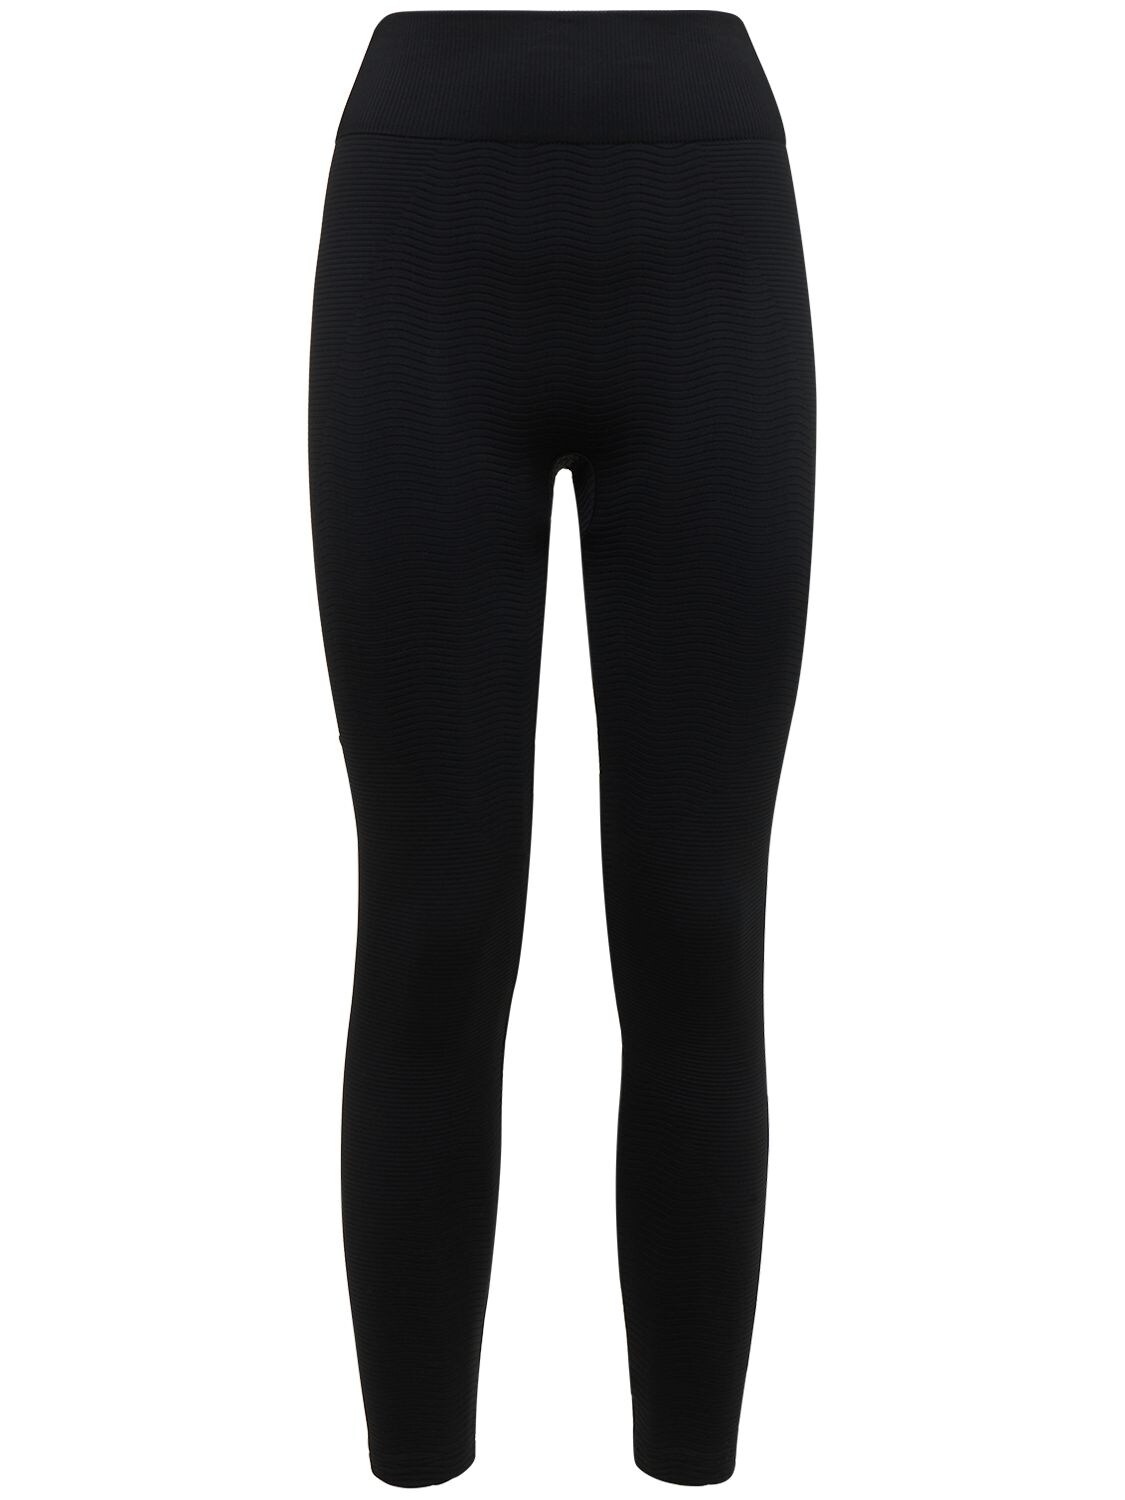 WOLFORD THE WELLNESS FORM FIT SMOOTHING LEGGINGS